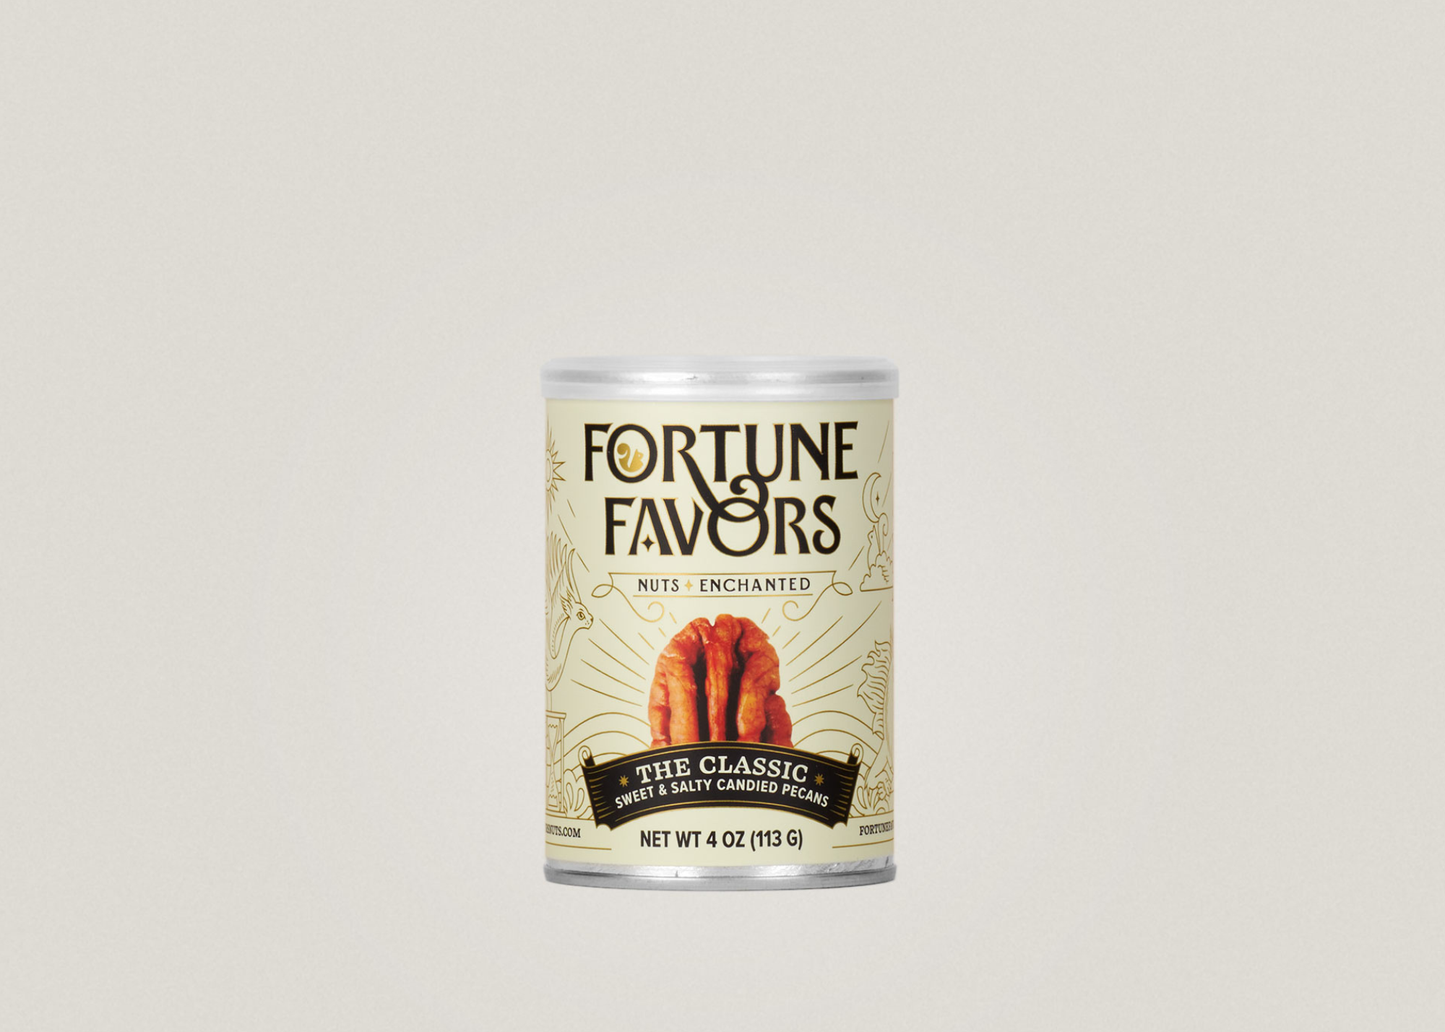 Fortune Favors The Classic Candied Pecans 4 oz